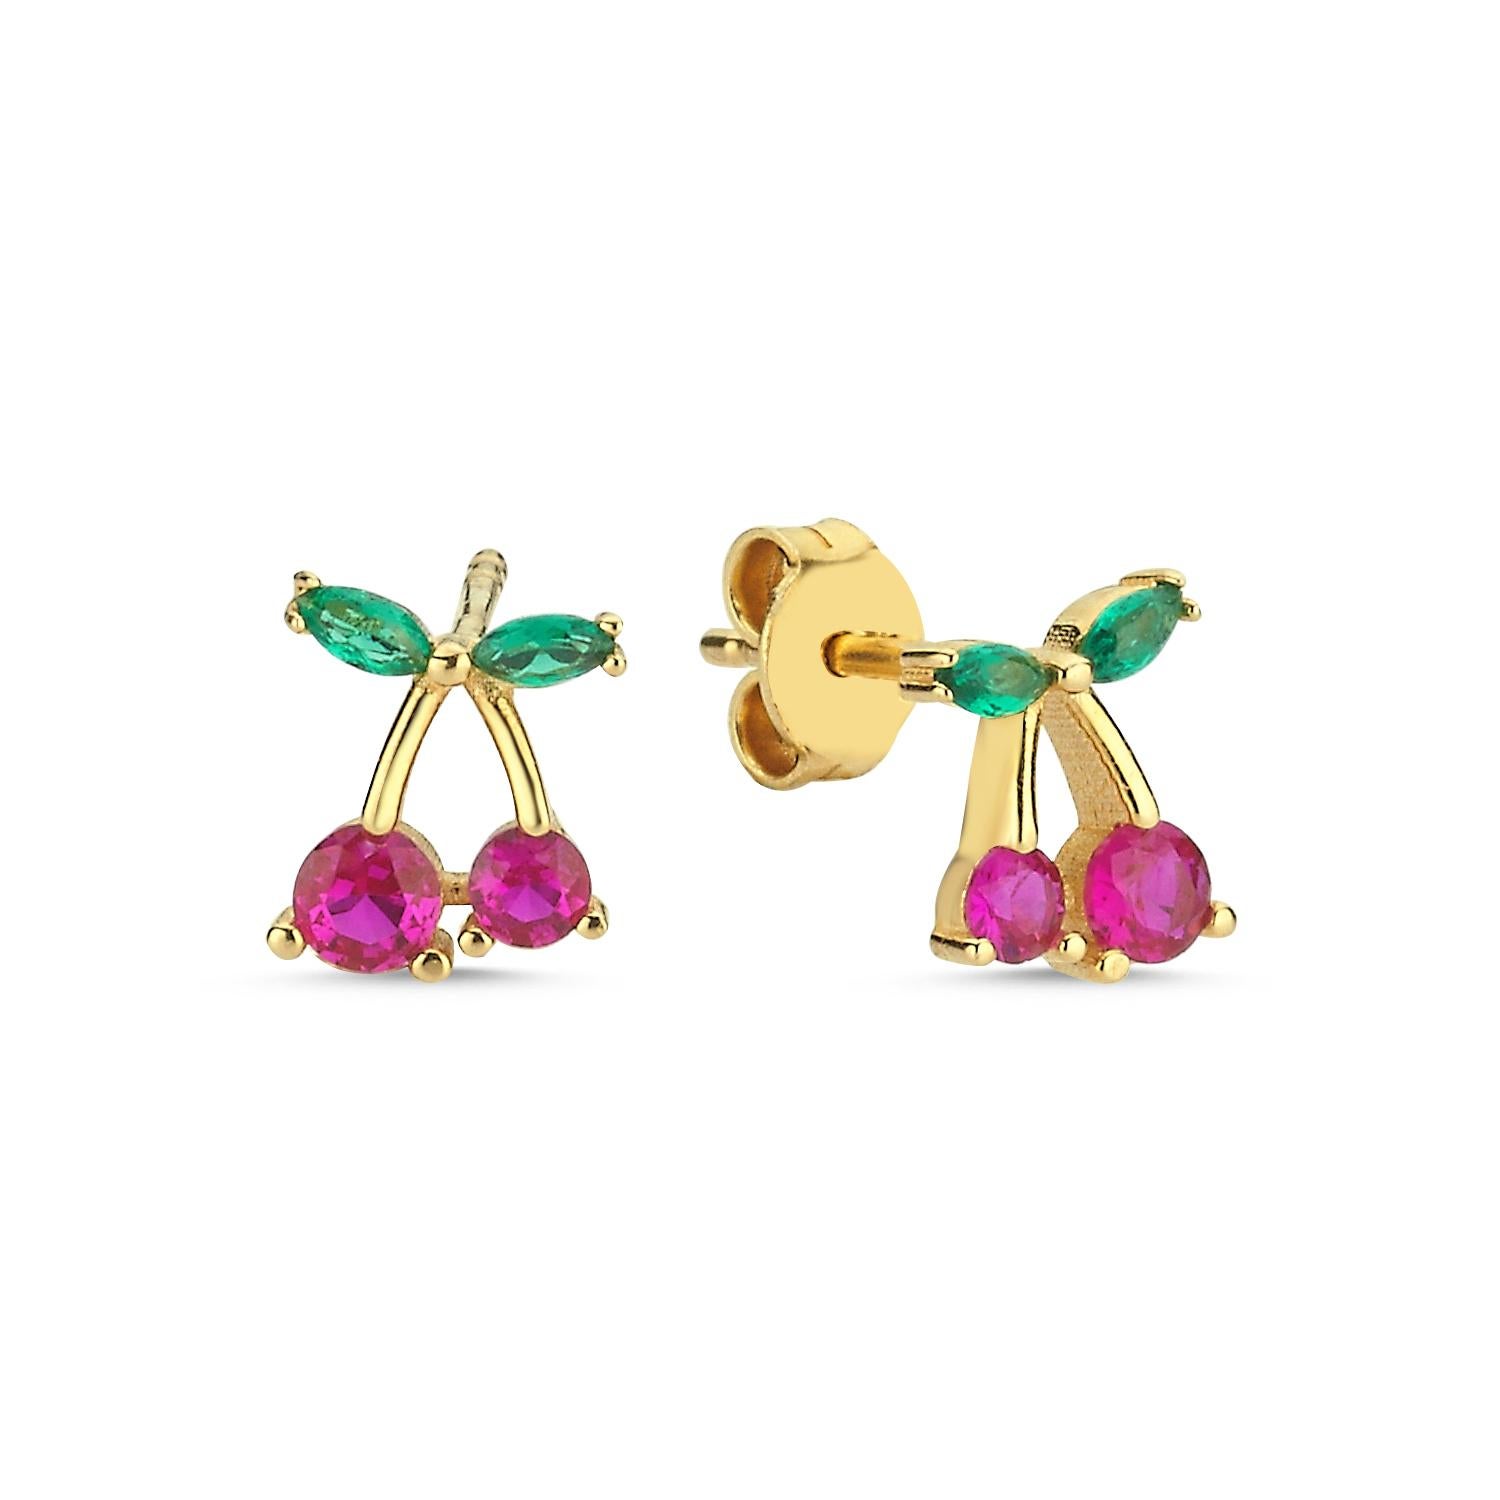 14k yellow gold Cherry earrings. Indulge in the vivid treasure of our Tsavorite， Rhodolite Garnet and Double-Cherry Stud Earrings in 14K Yellow Gold. Crafted with meticulous attention to detail, this earring boasts a stunning combination of round